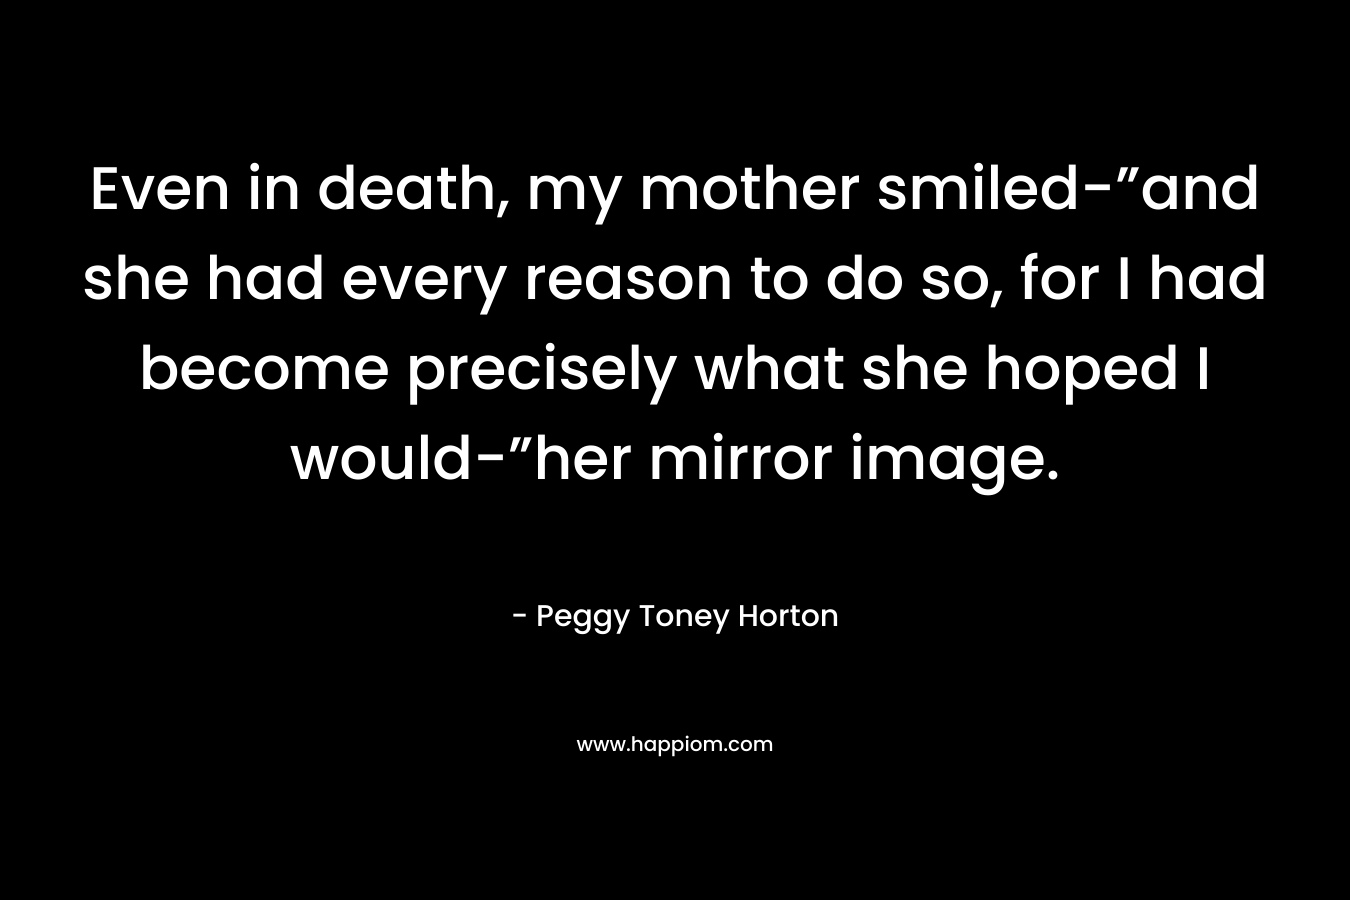 Even in death, my mother smiled-”and she had every reason to do so, for I had become precisely what she hoped I would-”her mirror image. – Peggy Toney Horton